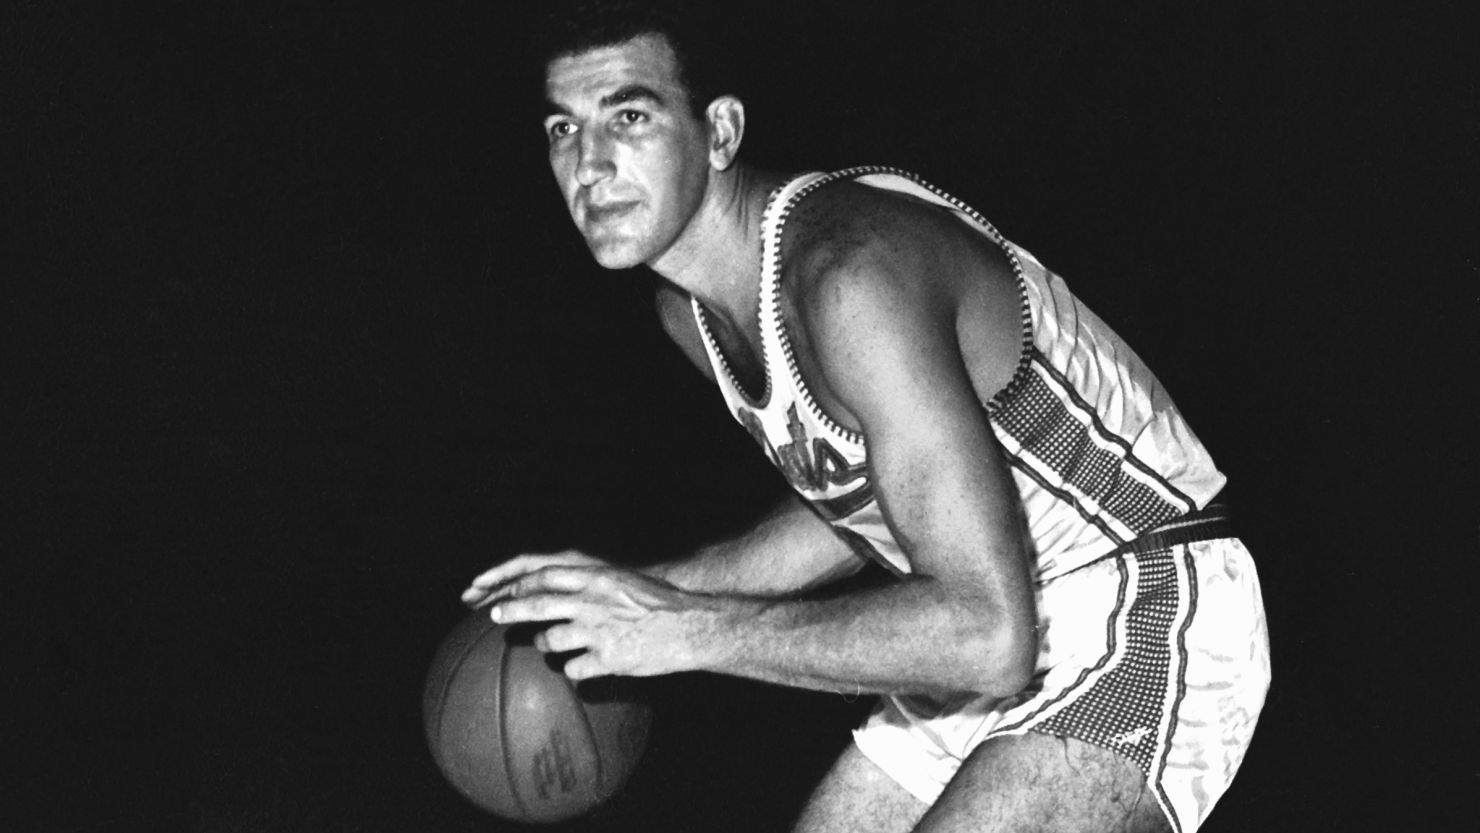 Dolph Schayes of the Syracuse Nationals poses for a portrait circa 1961.